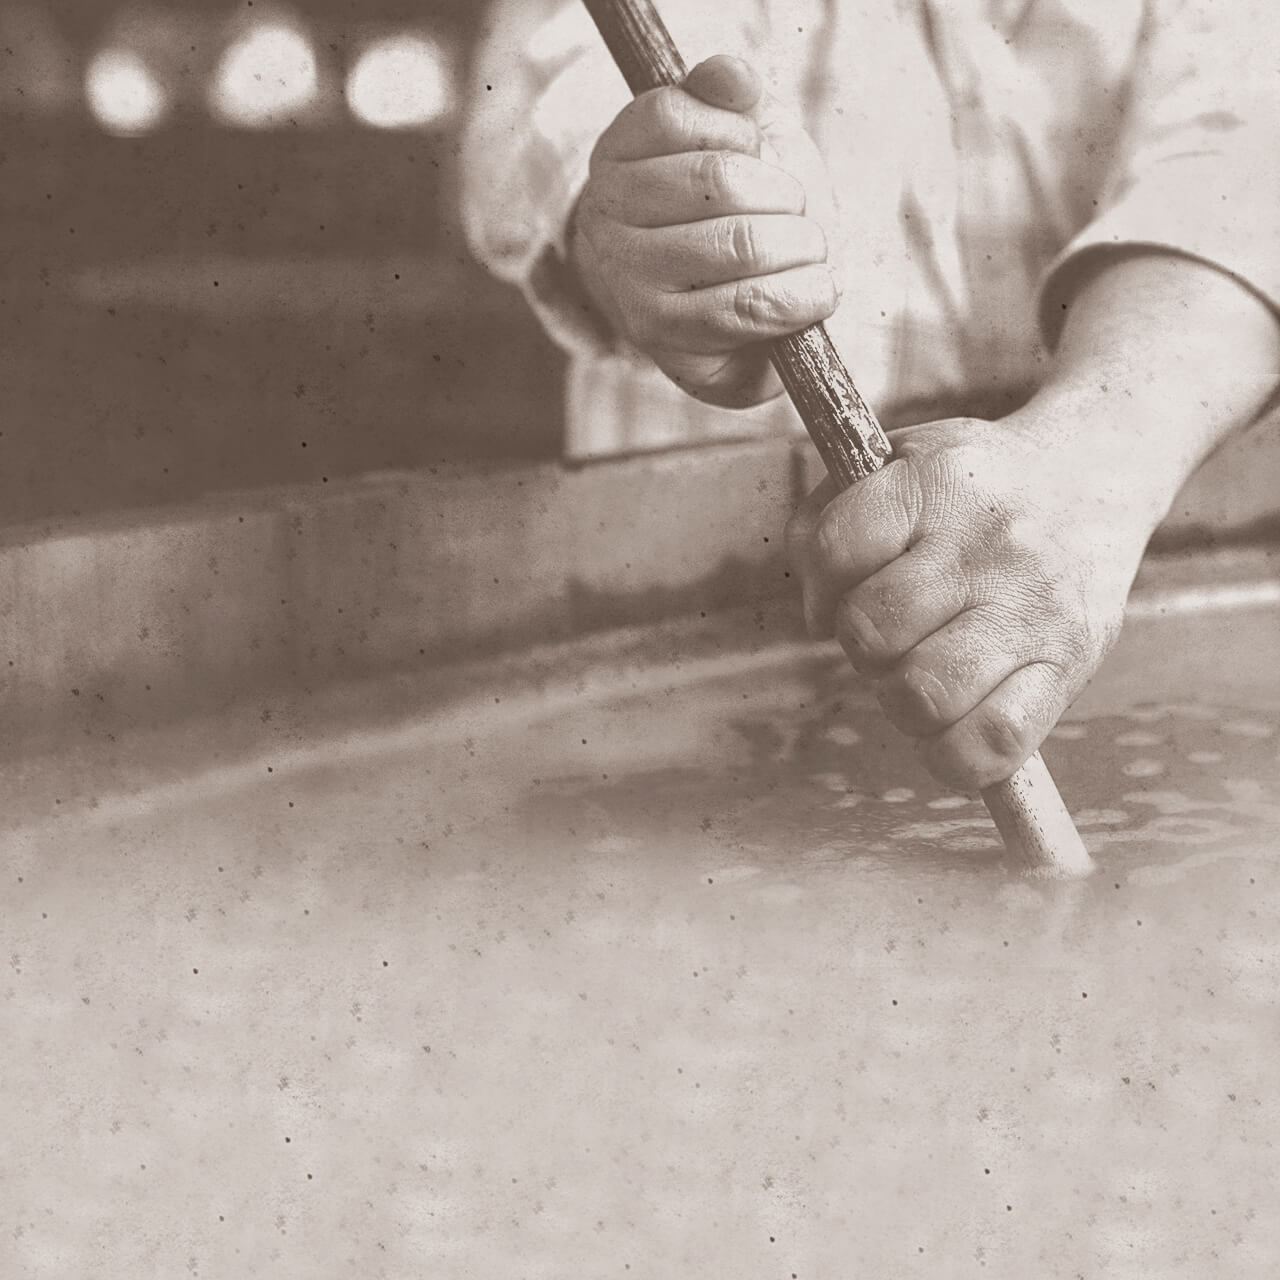 A distiller is creating the "Sour Mash process".